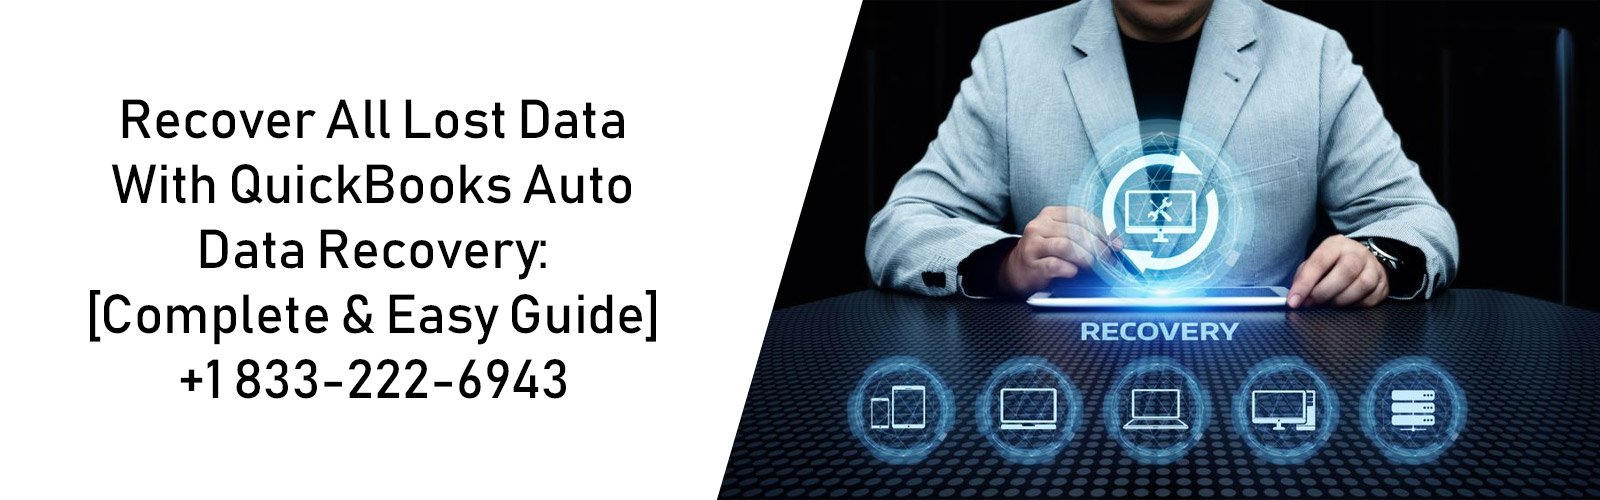 Recover All Lost Data with QuickBooks Auto Data Recovery: [Complete & Easy Guide]